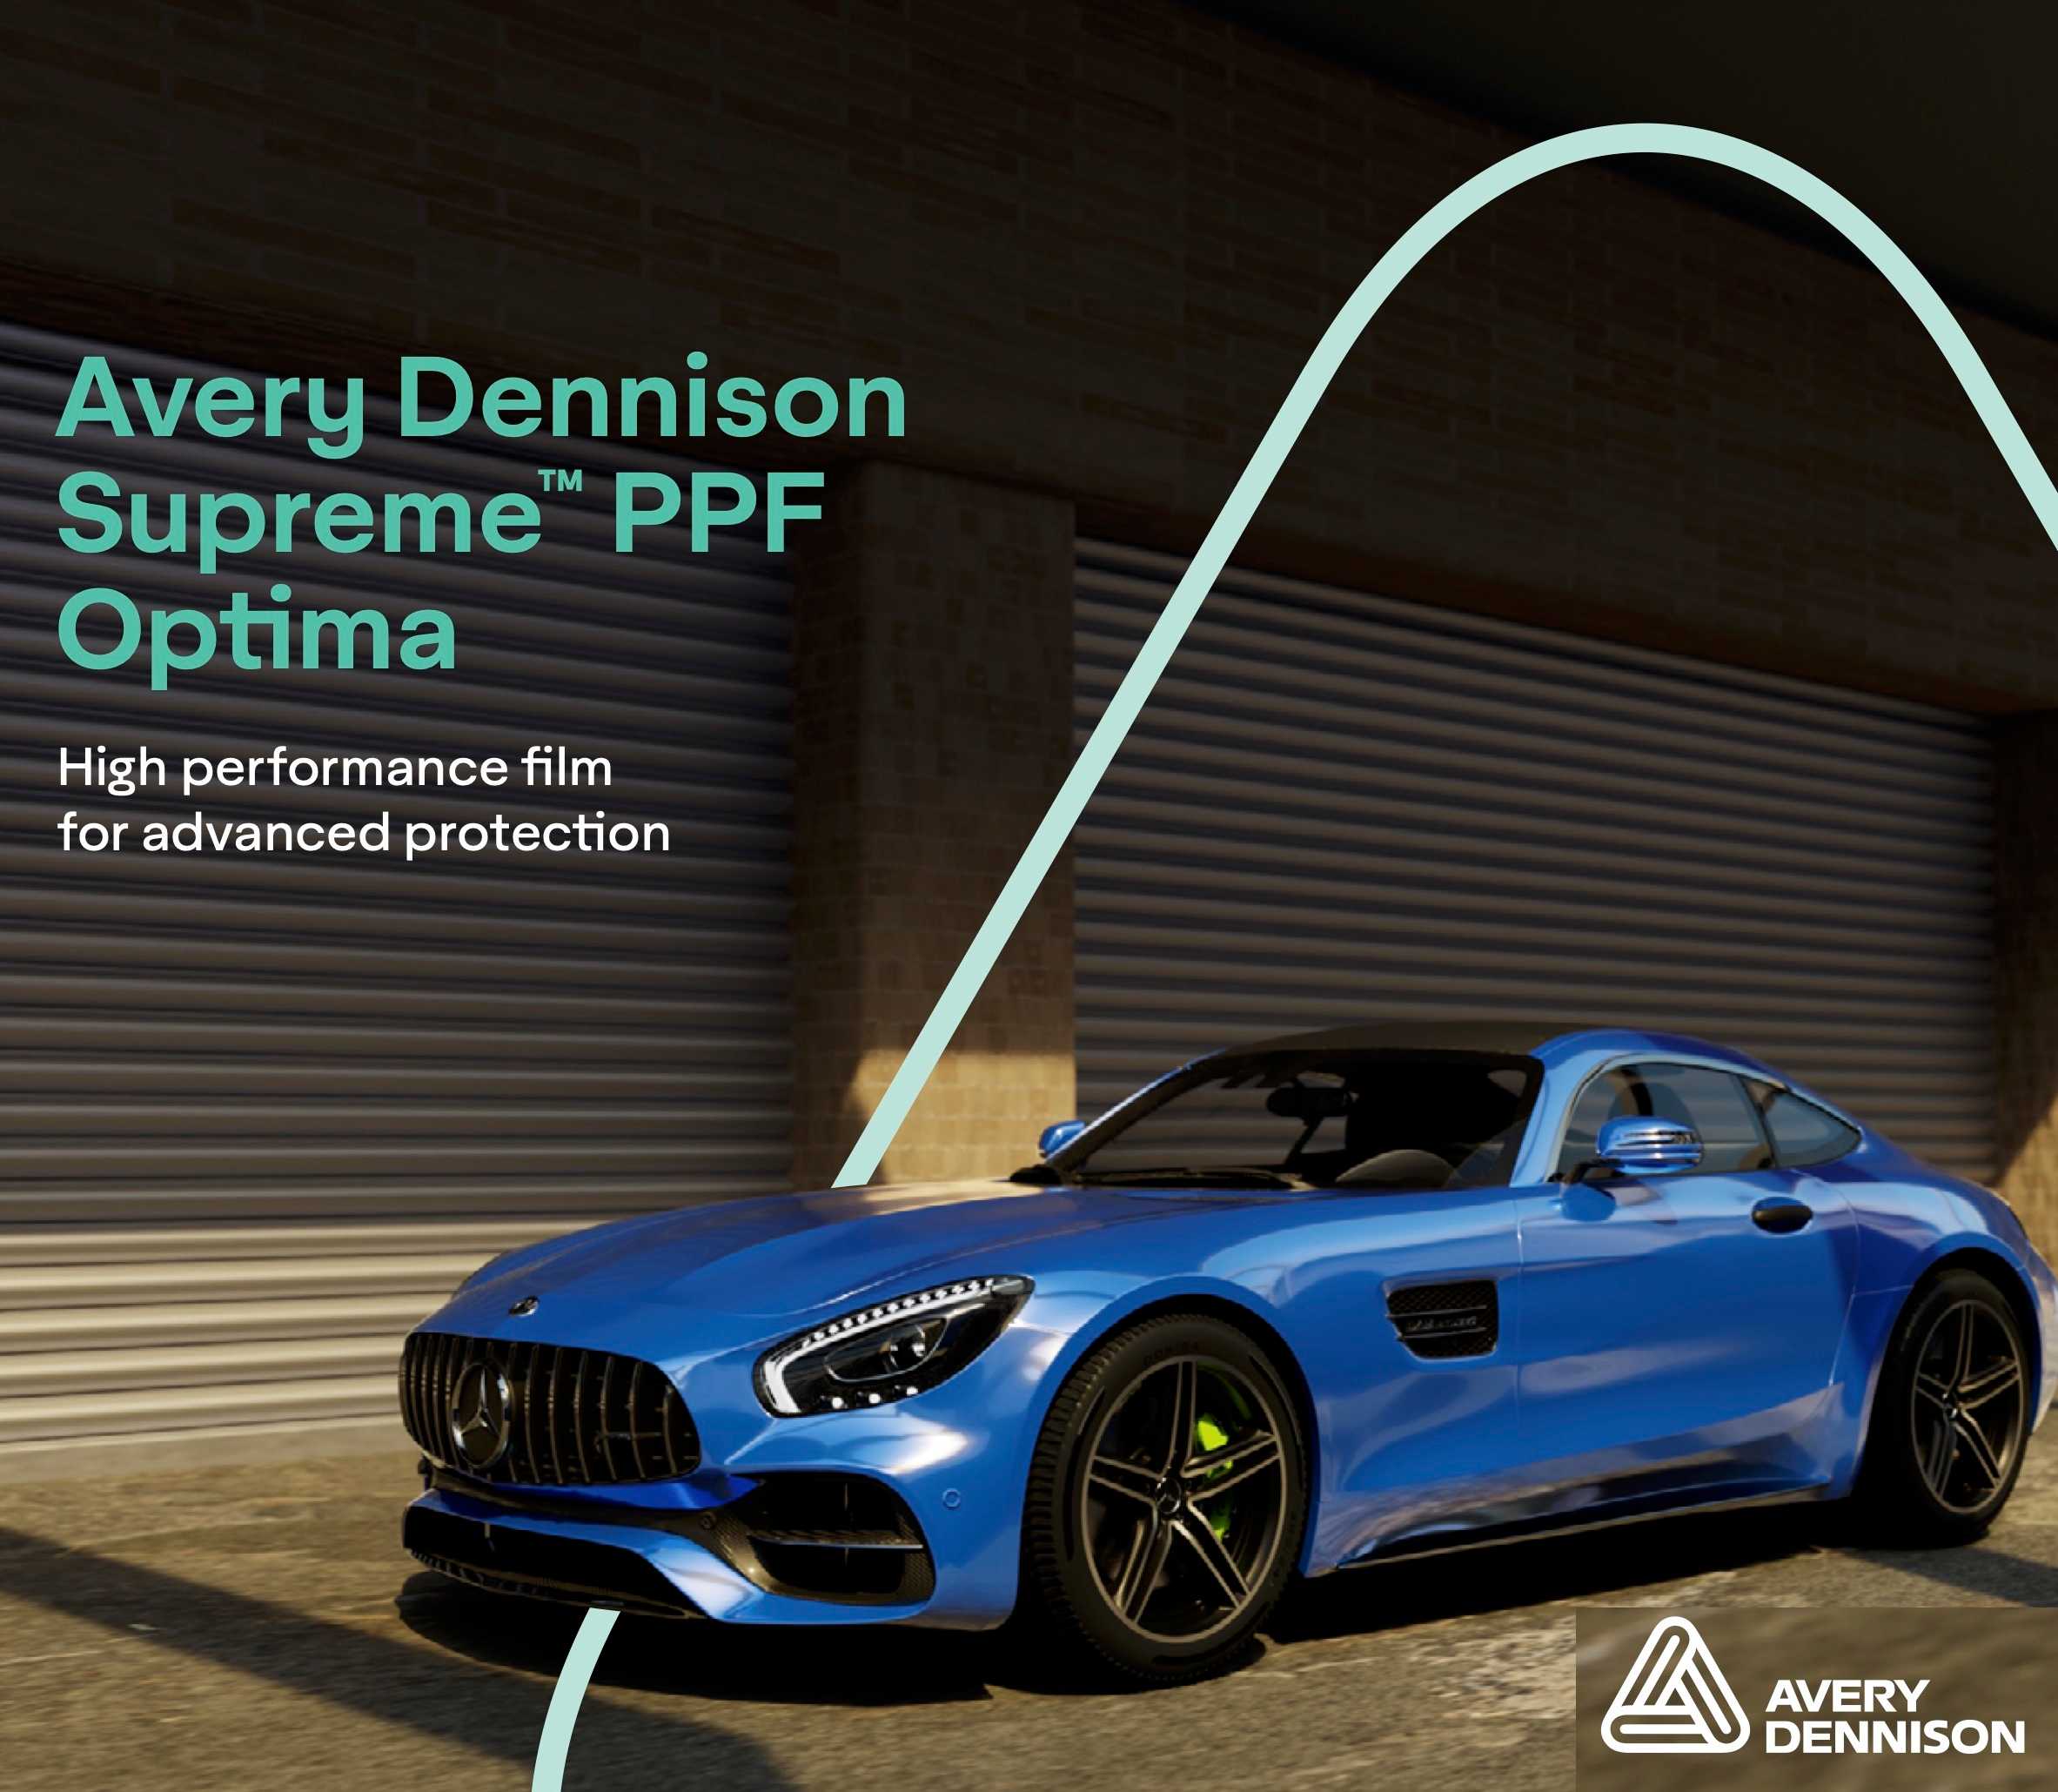 Supreme™ PPF Optima - High performance film for advanced protection